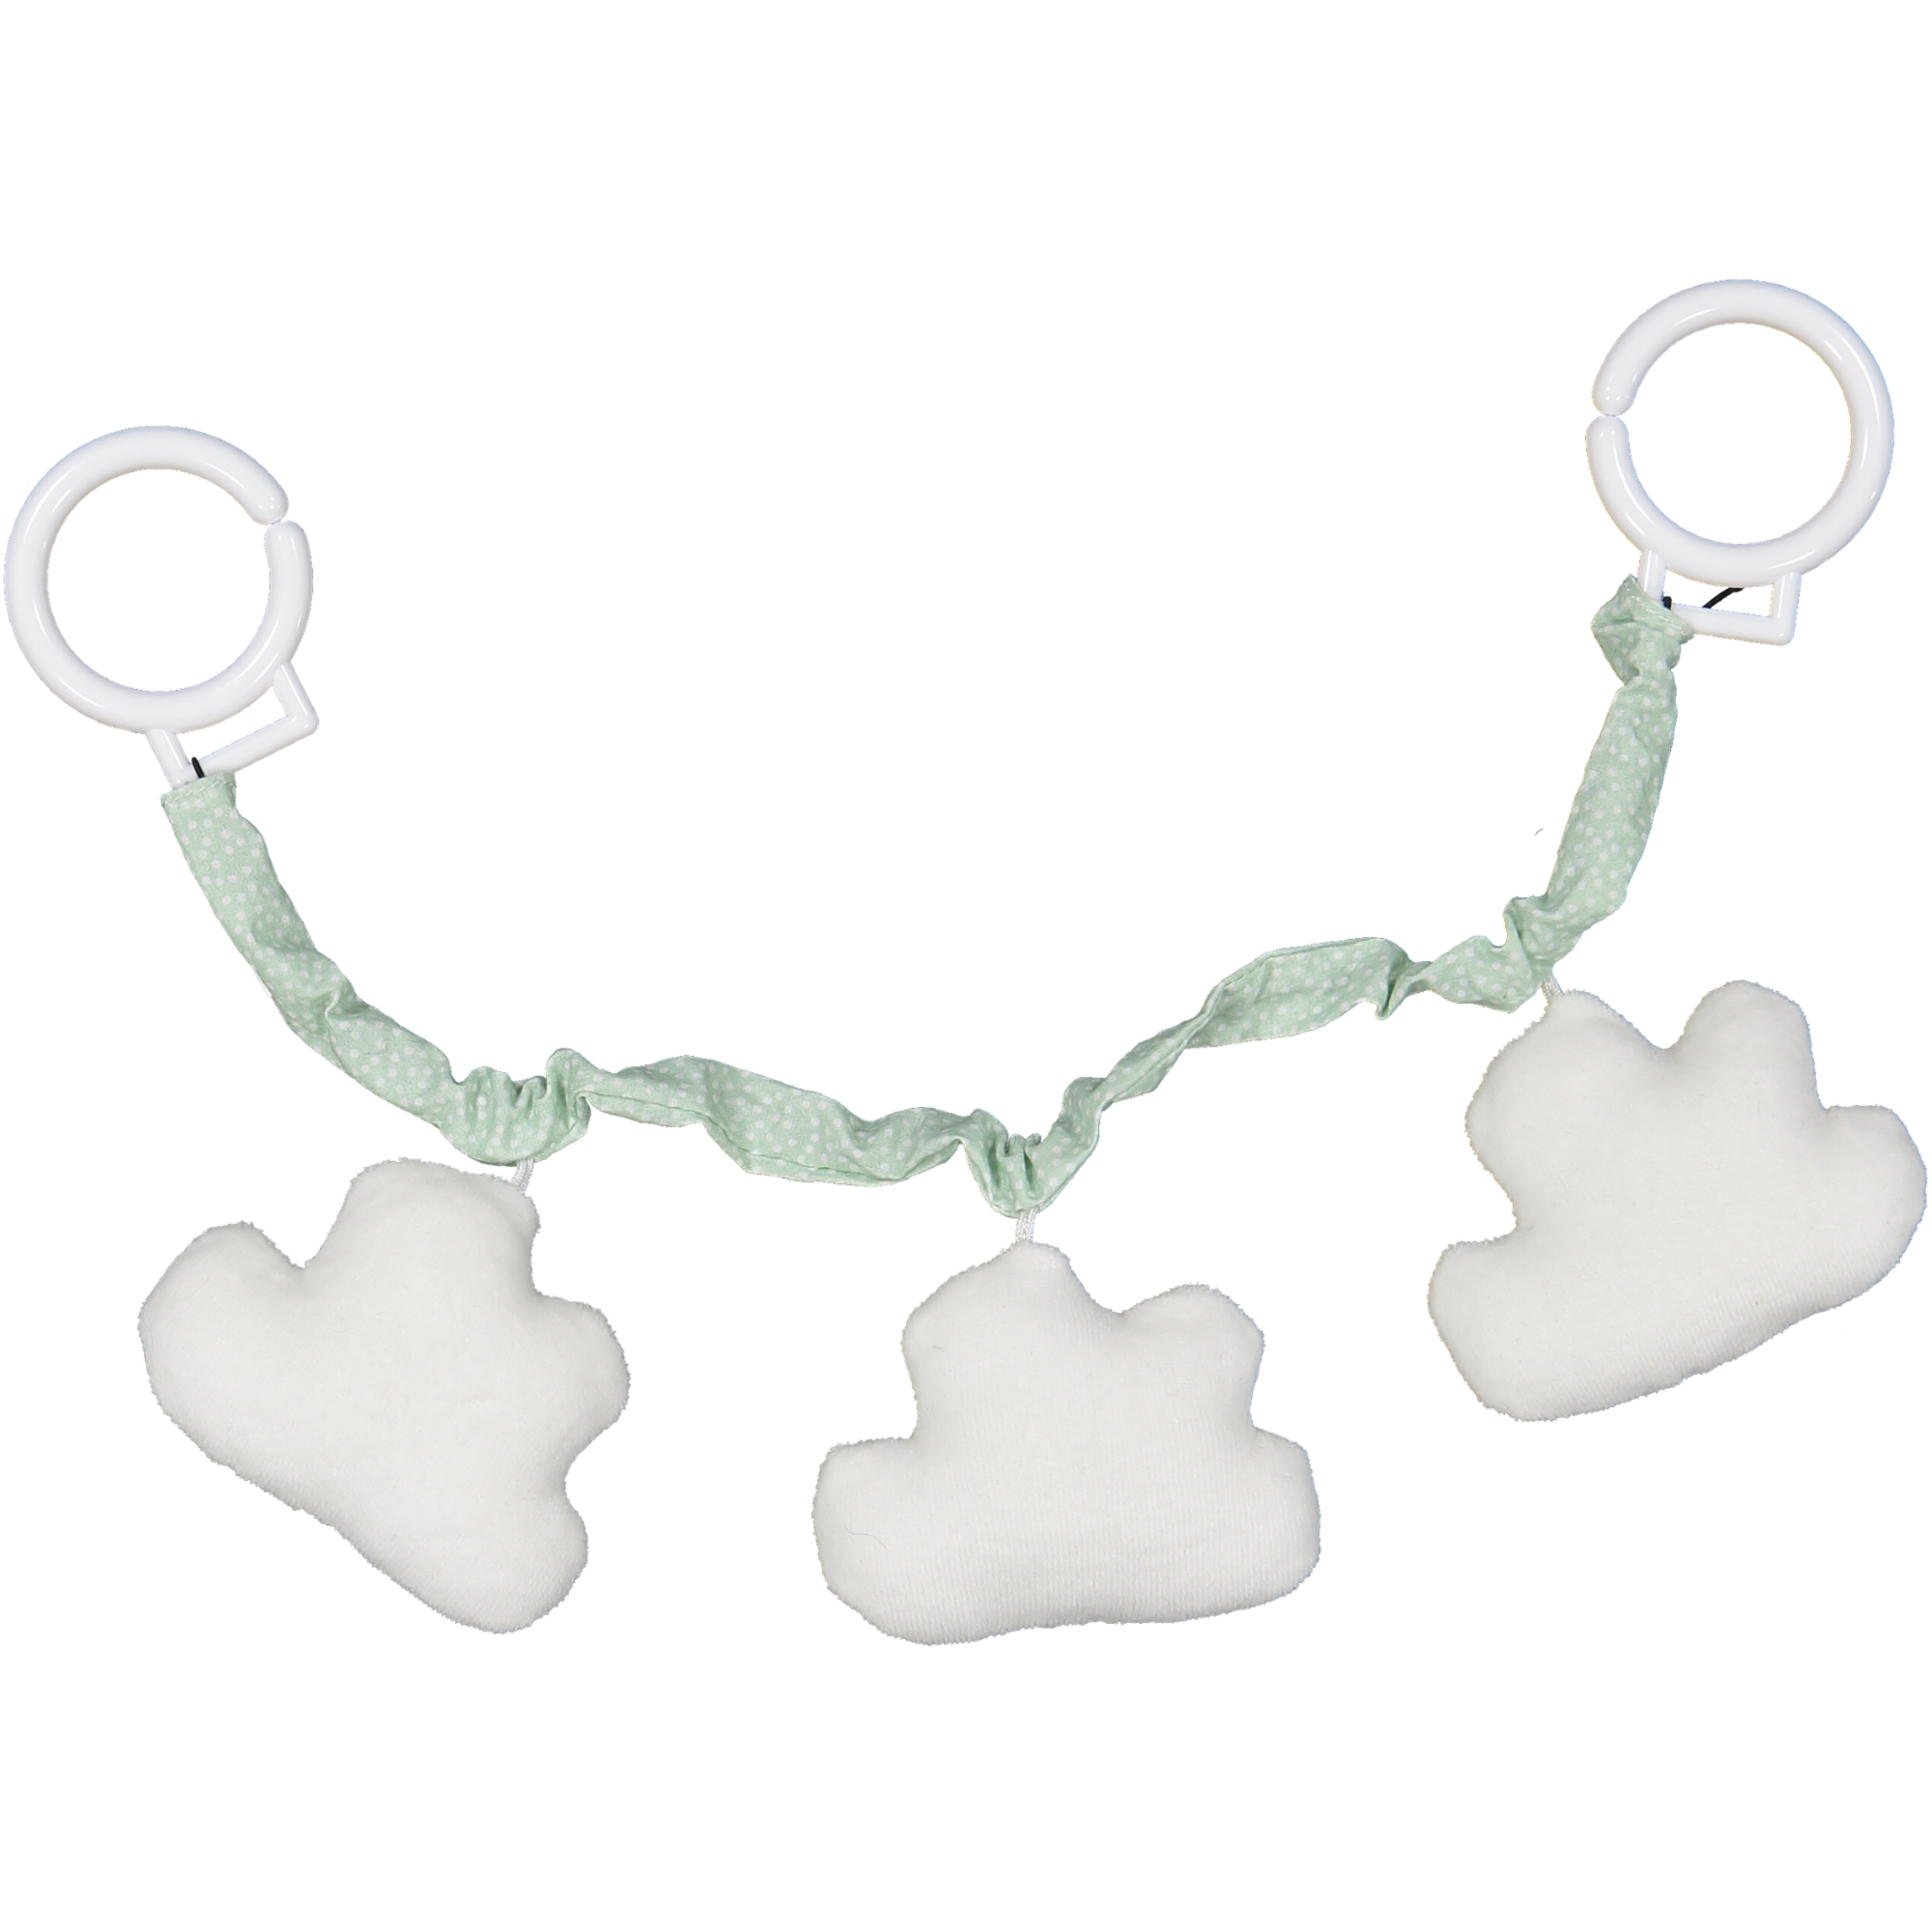 Stroller toy cloud Mint/white